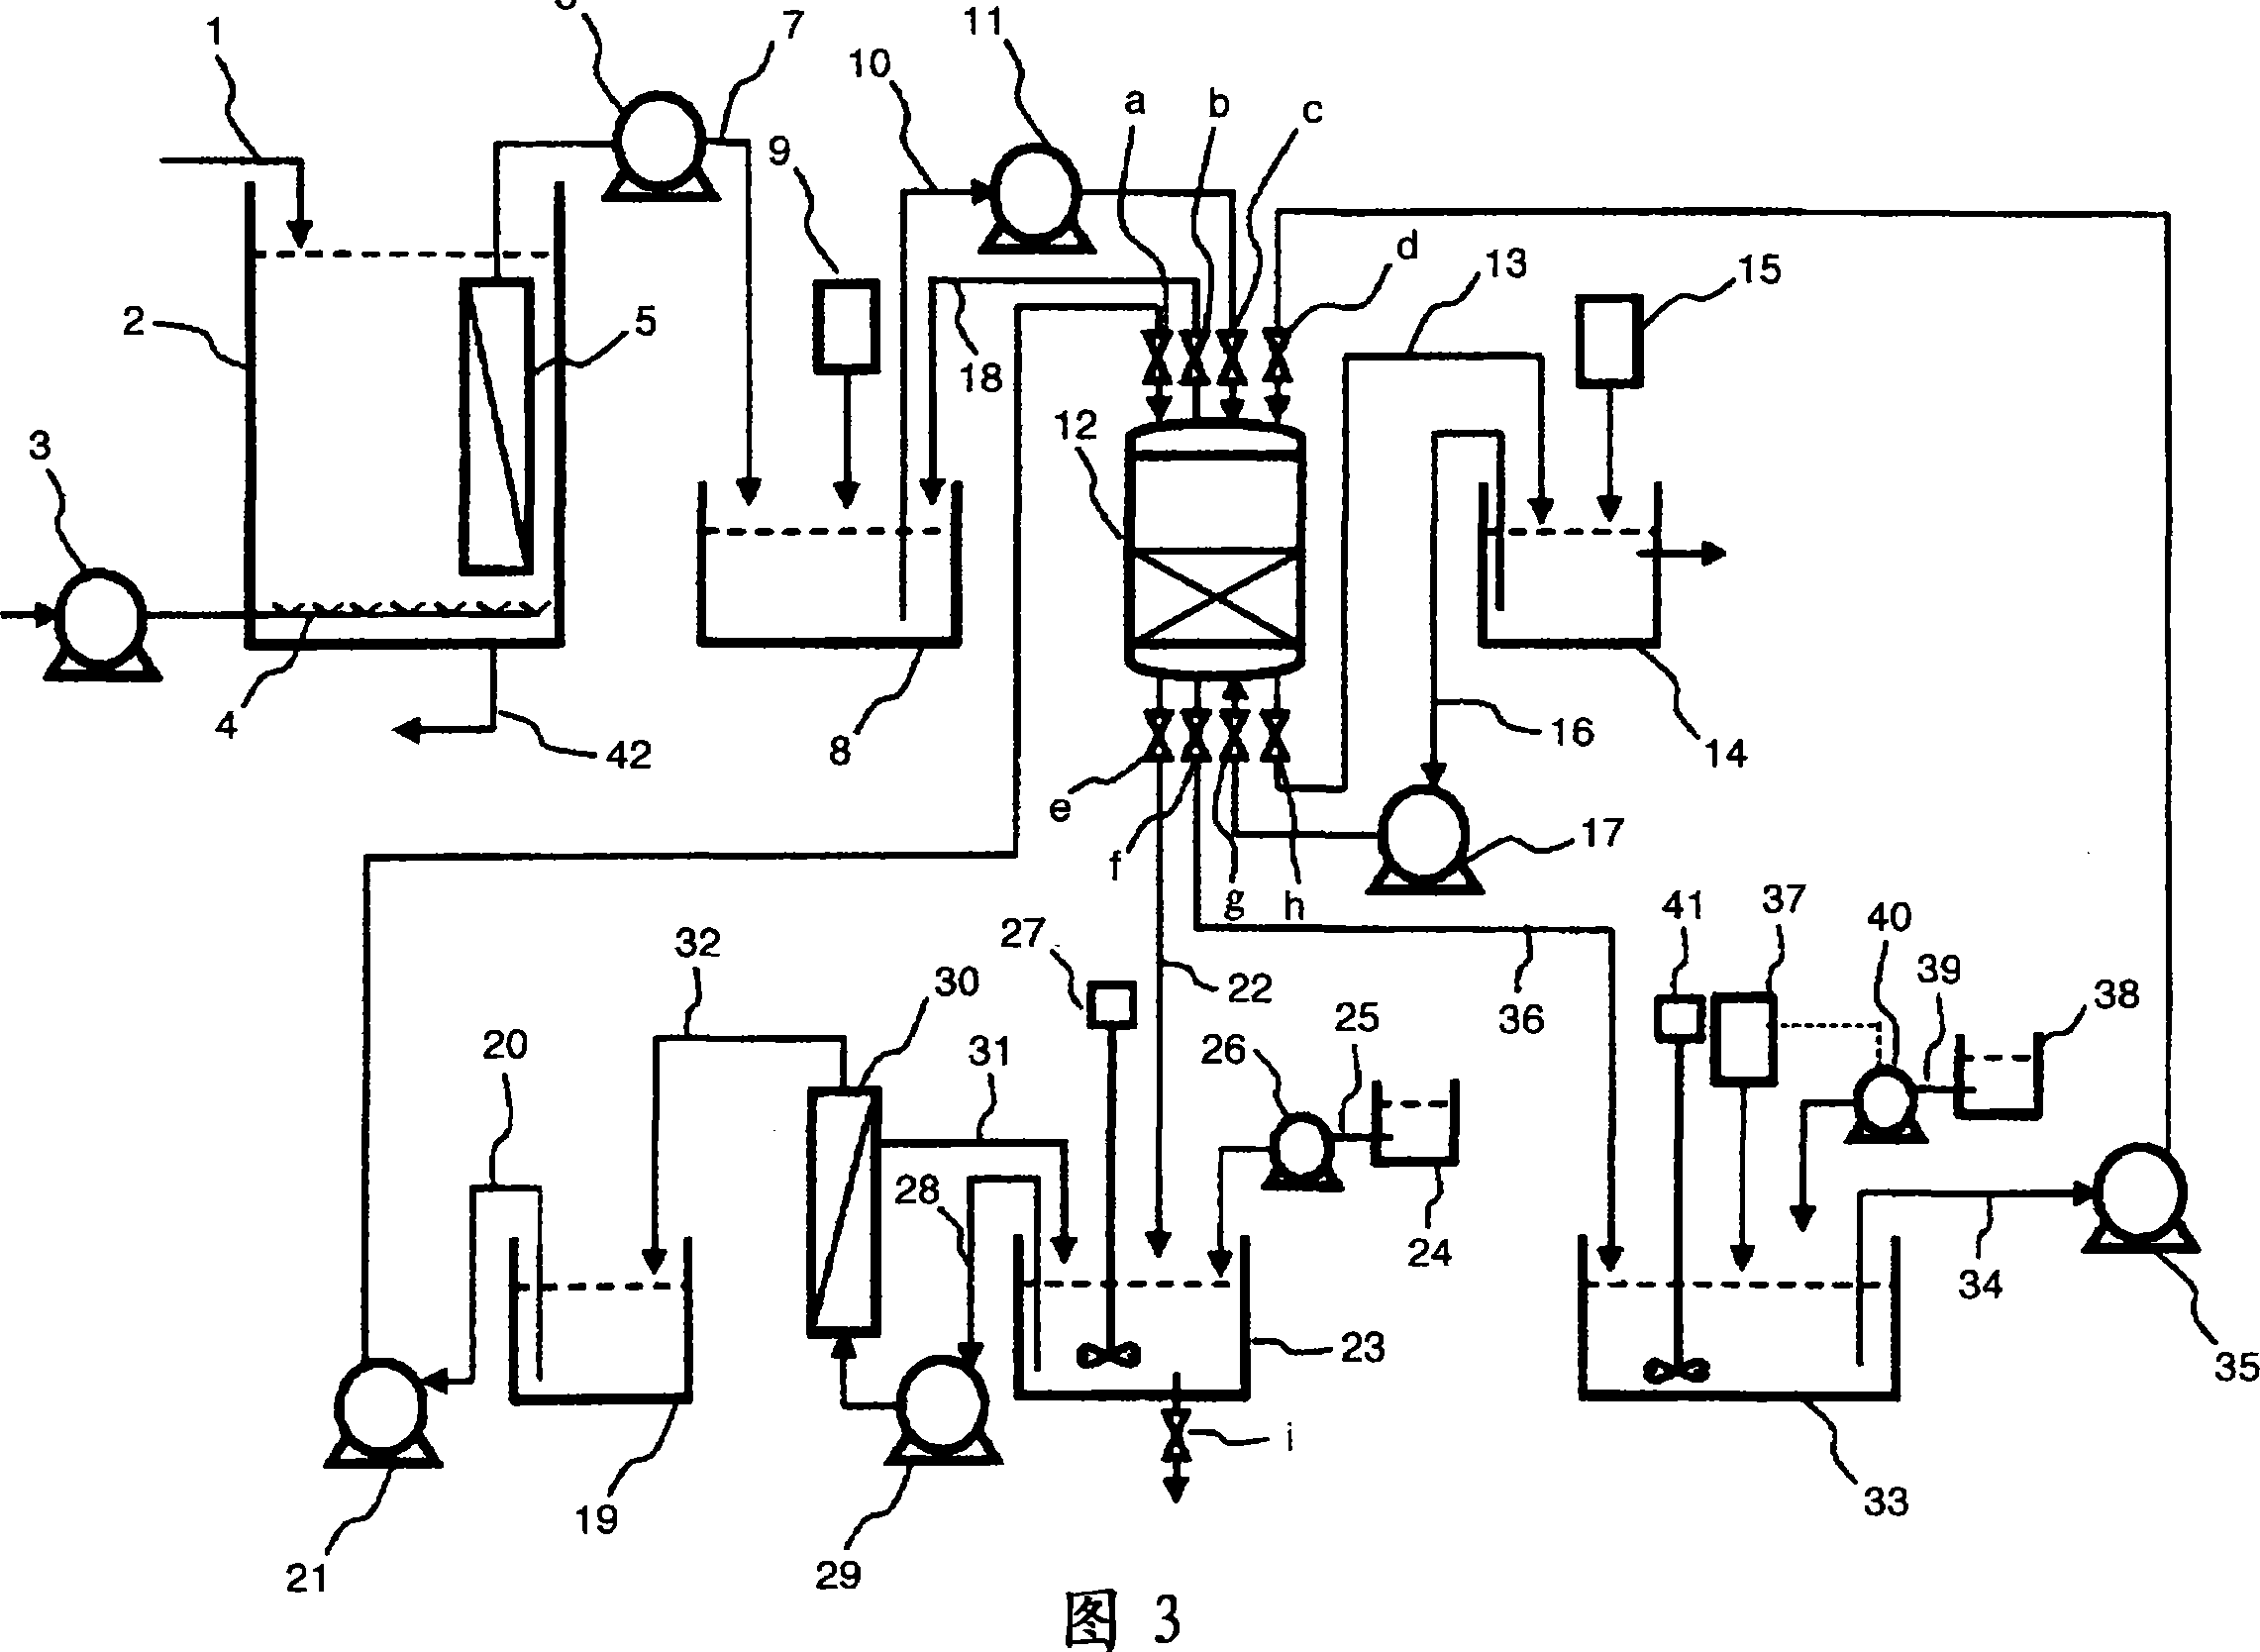 Waste water treatment device and method